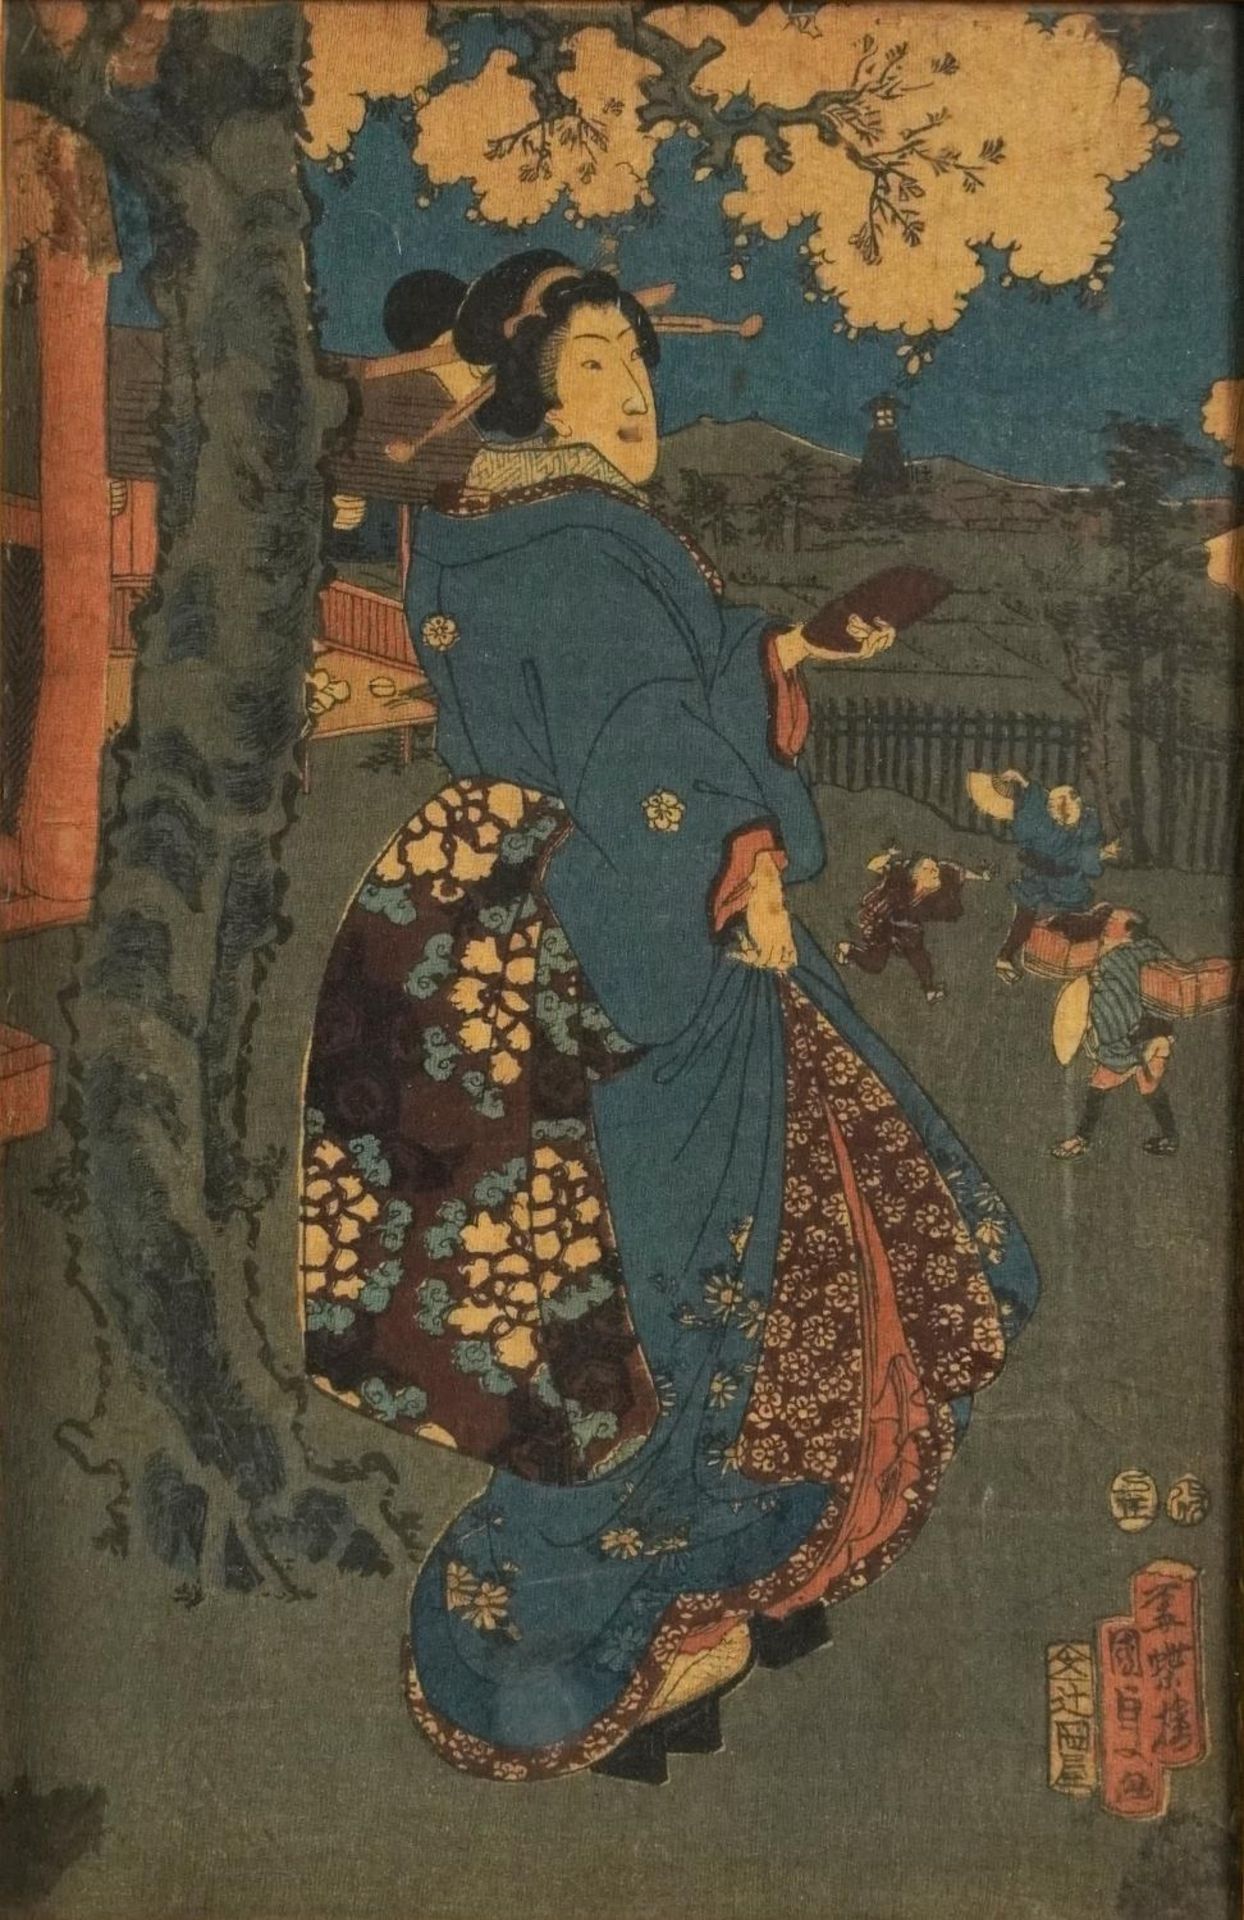 Geishas and children playing, pair of Japanese crepe paper pictures, mounted, framed and glazed, - Image 6 of 9